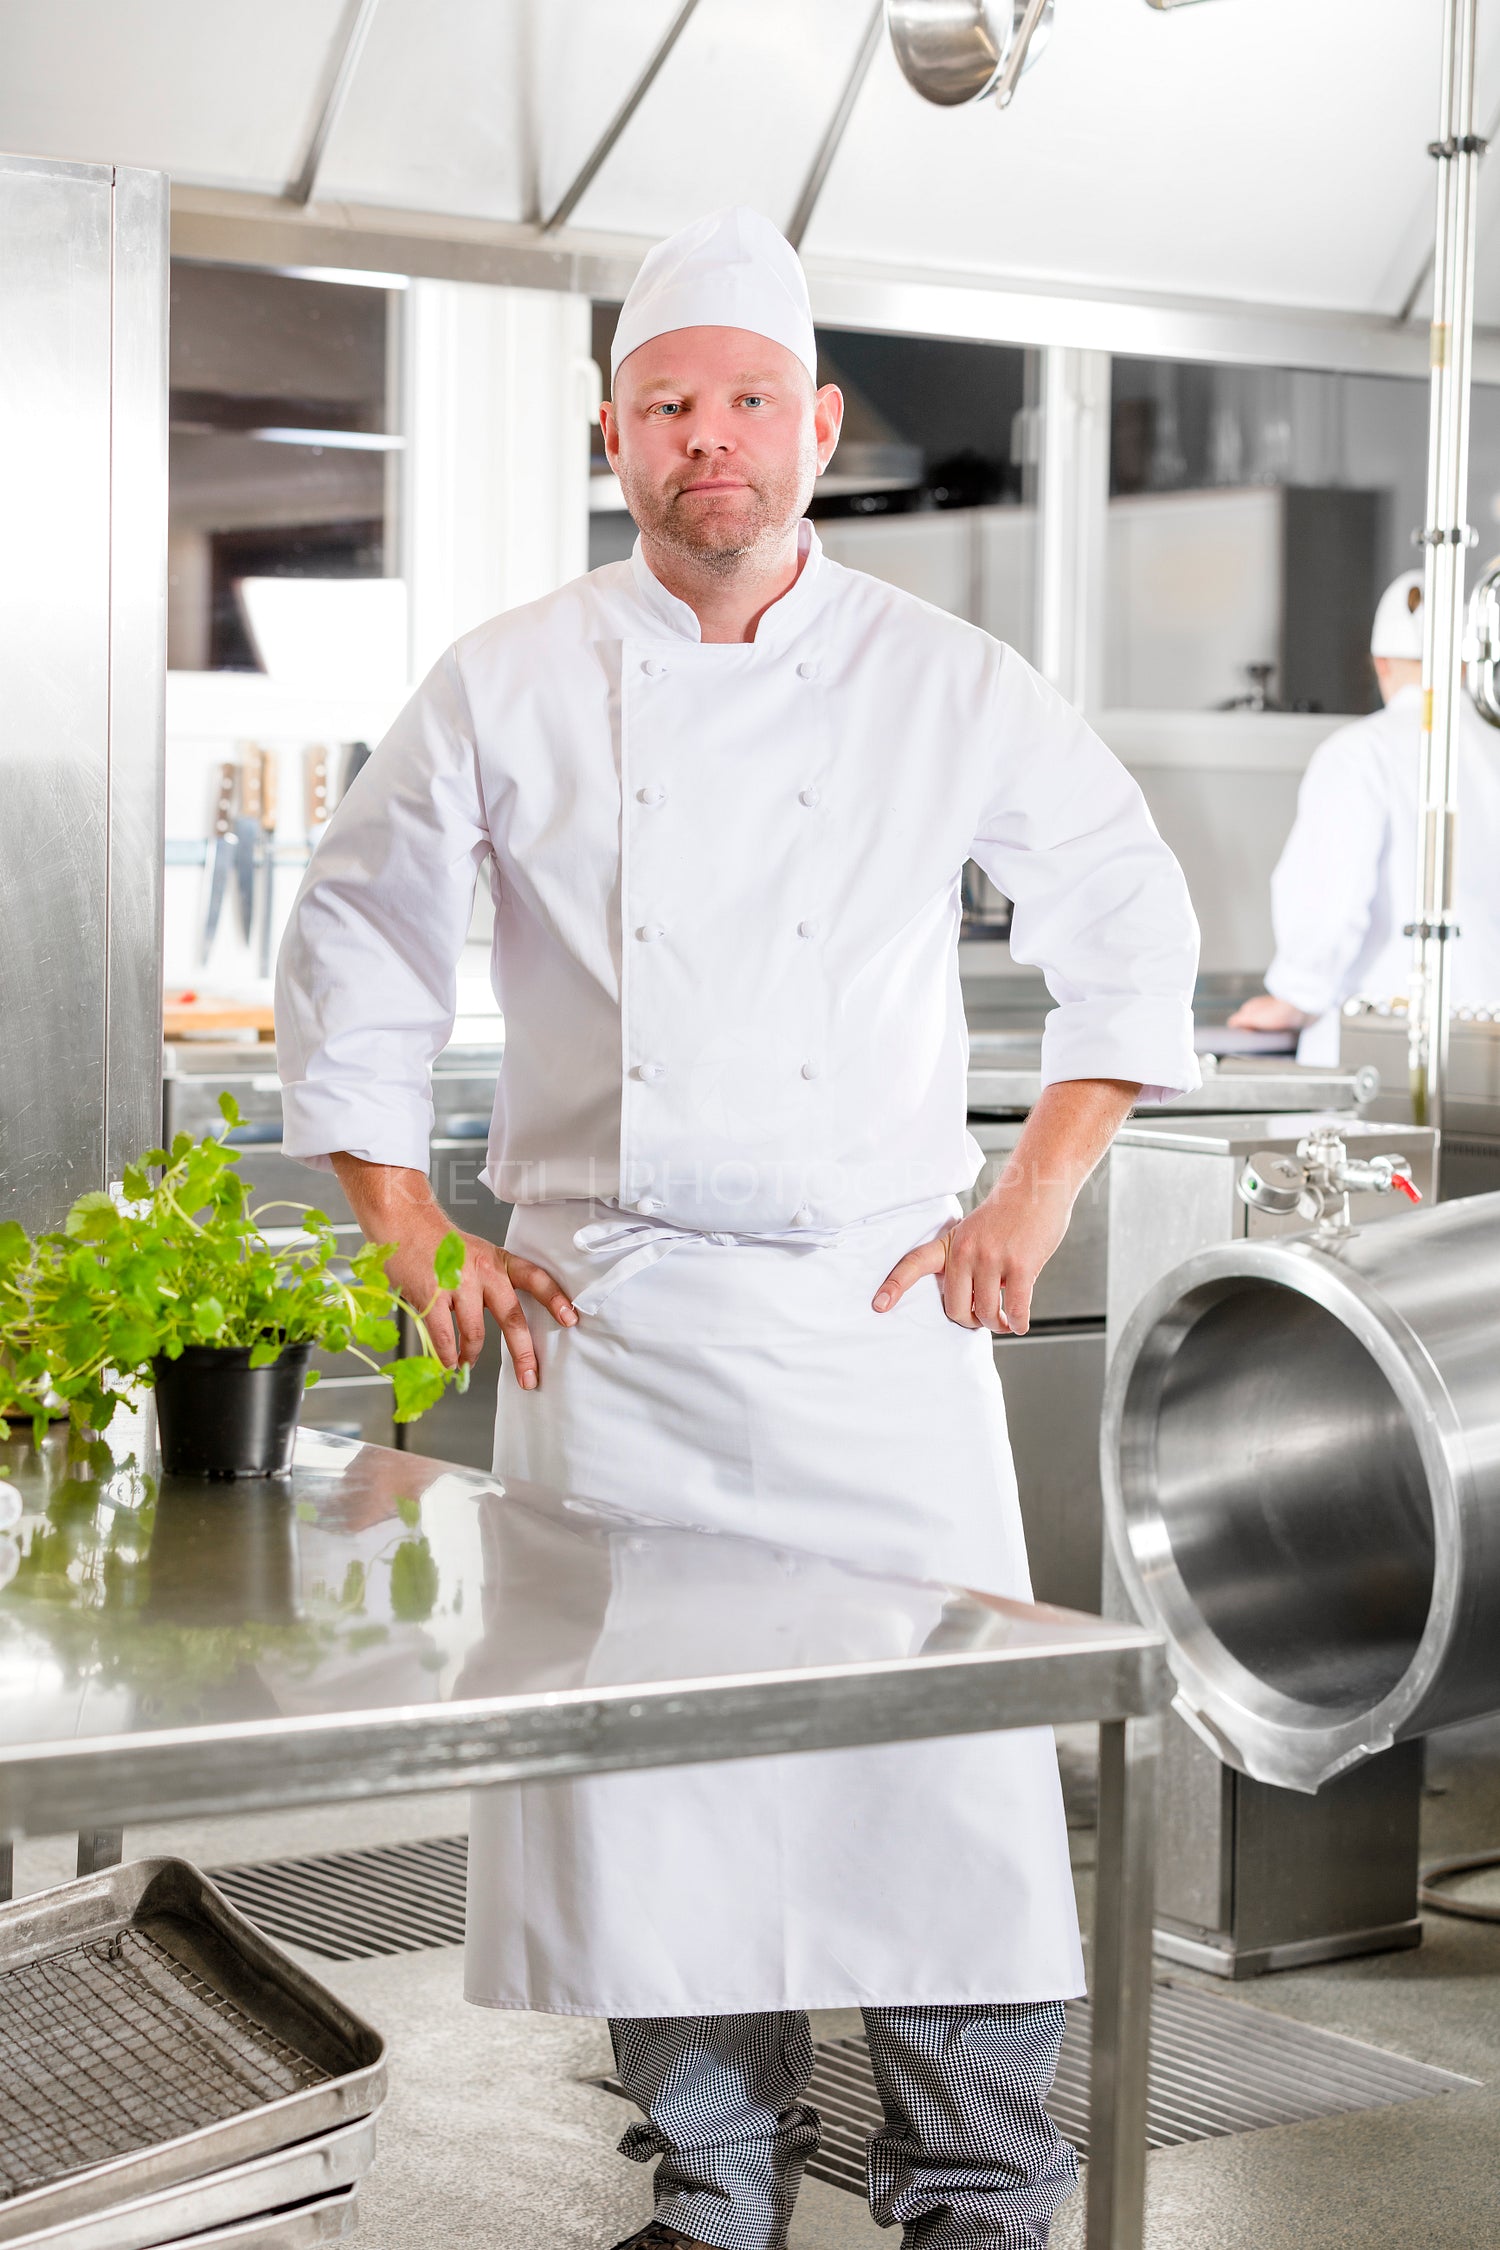 Professional chef standing in large kitchen